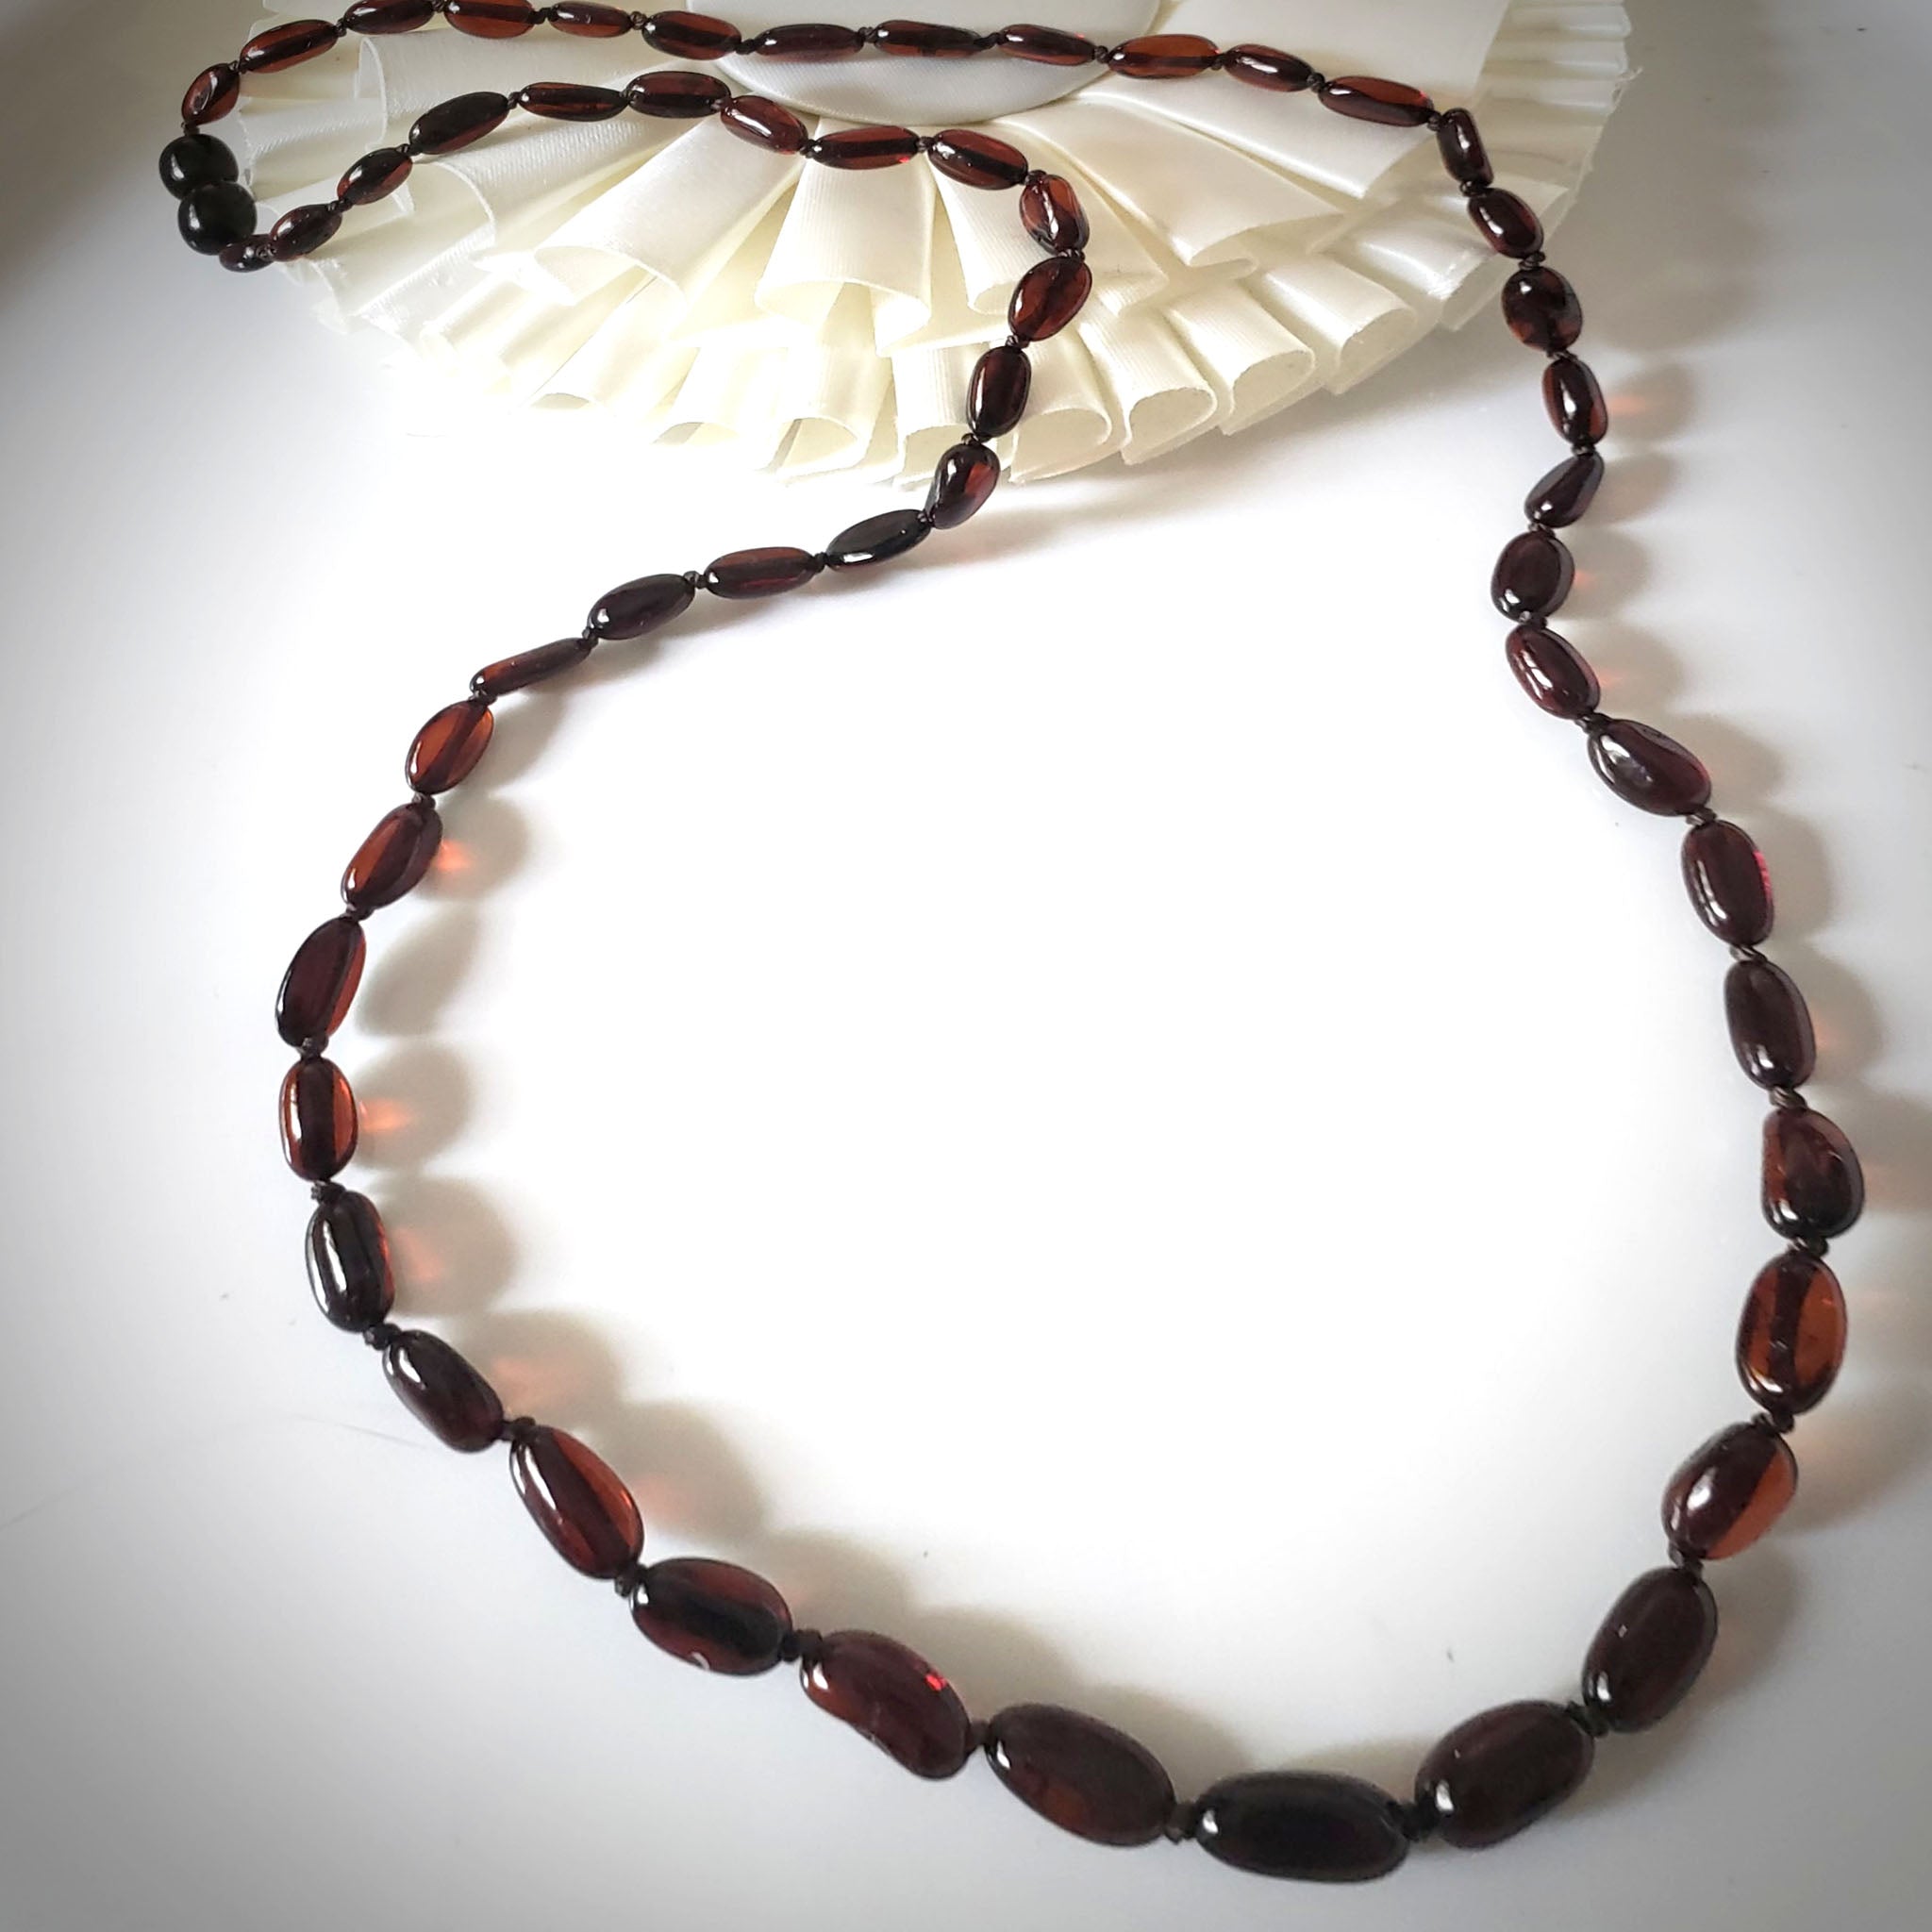 Polished cherry amber necklace - Genuine Amber